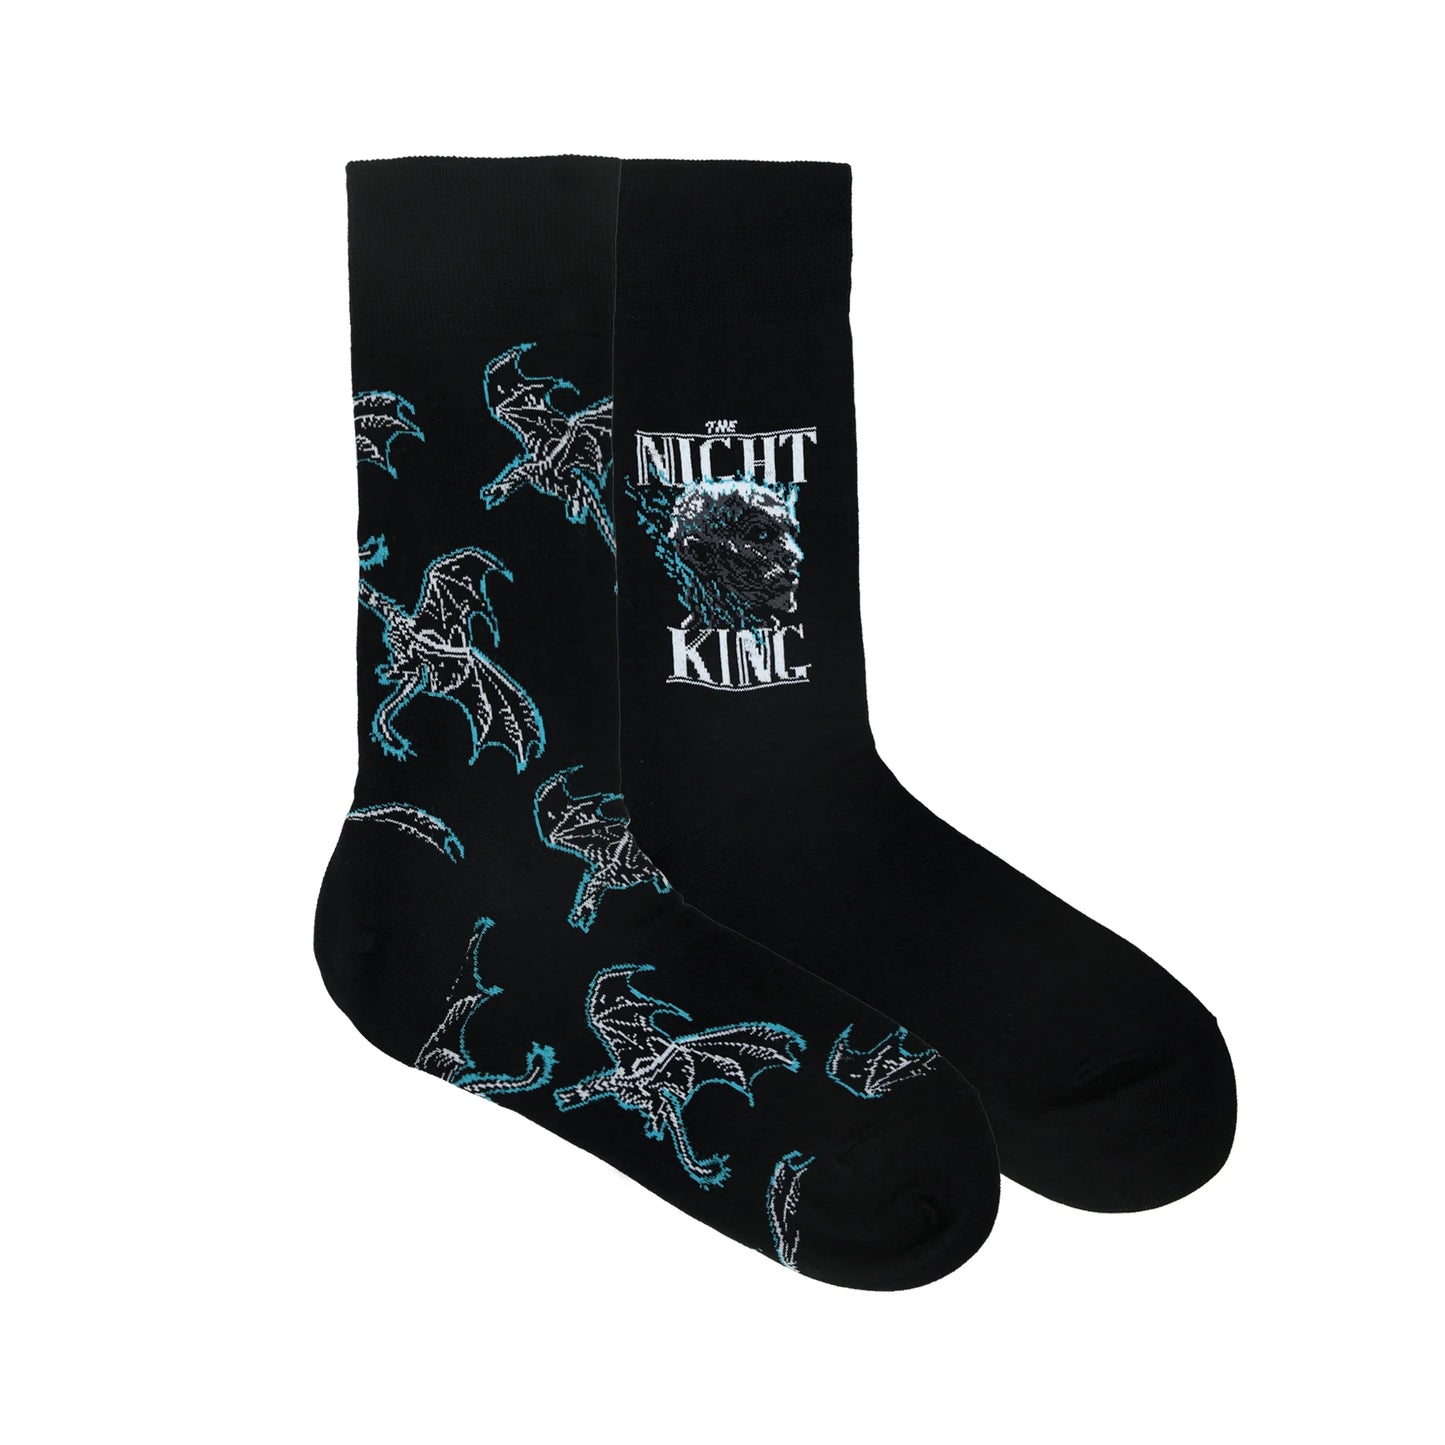 BALENZIA X GAME OF THRONES THE NIGHT KING & VISERION, THE ICE DRAGON CREW LENGTH SOCKS FOR MEN (FREE SIZE) (PACK OF 2 PAIRS/1U)BLAC